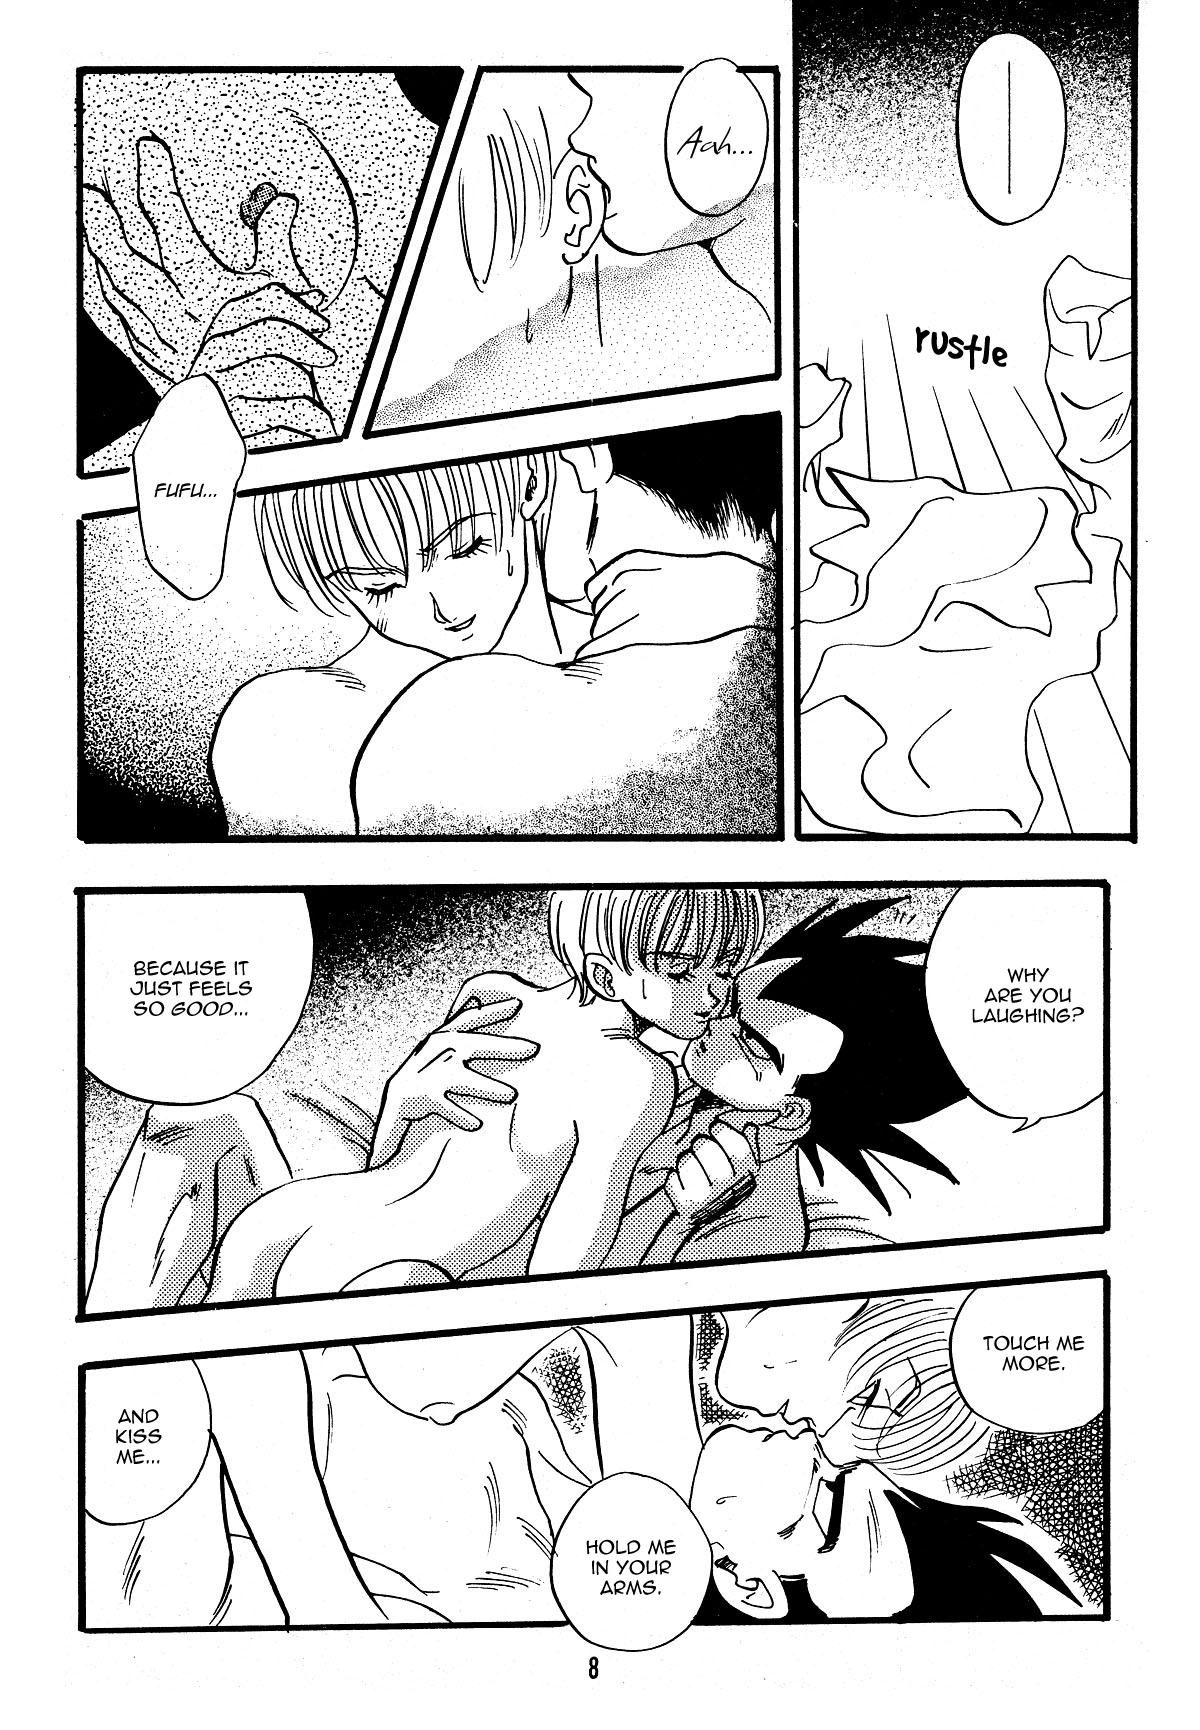 Celebrity Nudes E Flame - Dragon ball Argentina - Page 9